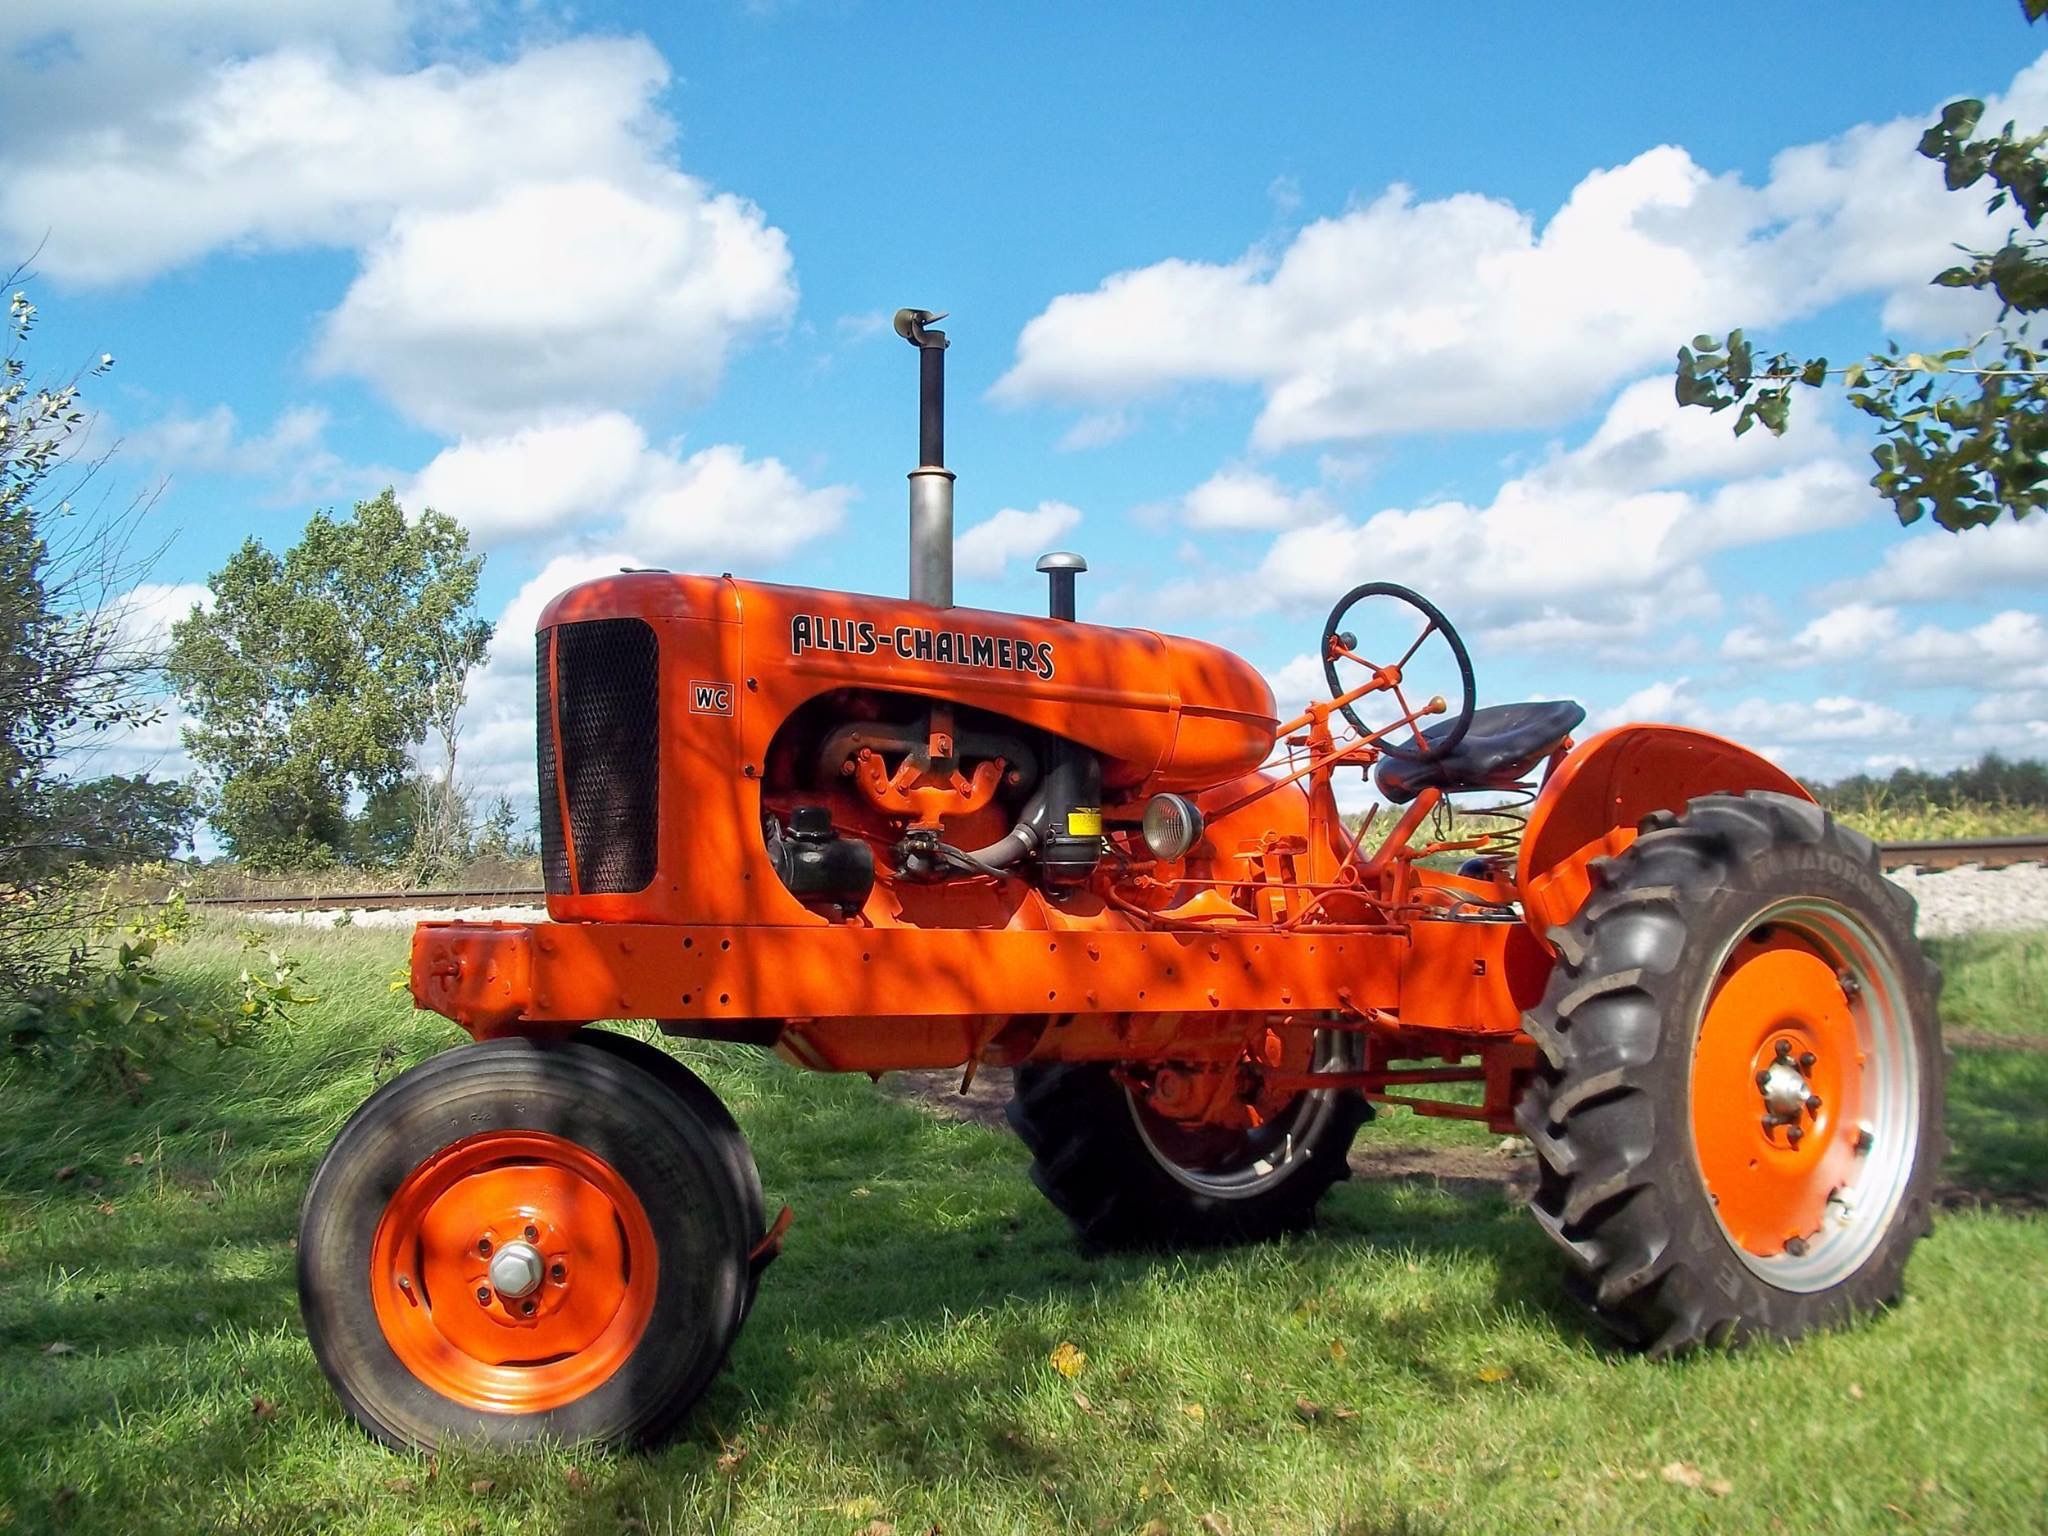 Allis Chalmers WC Tractor, Styled, 40s Vintage. Tractors, Case Tractors, Allis Chalmers Tractors